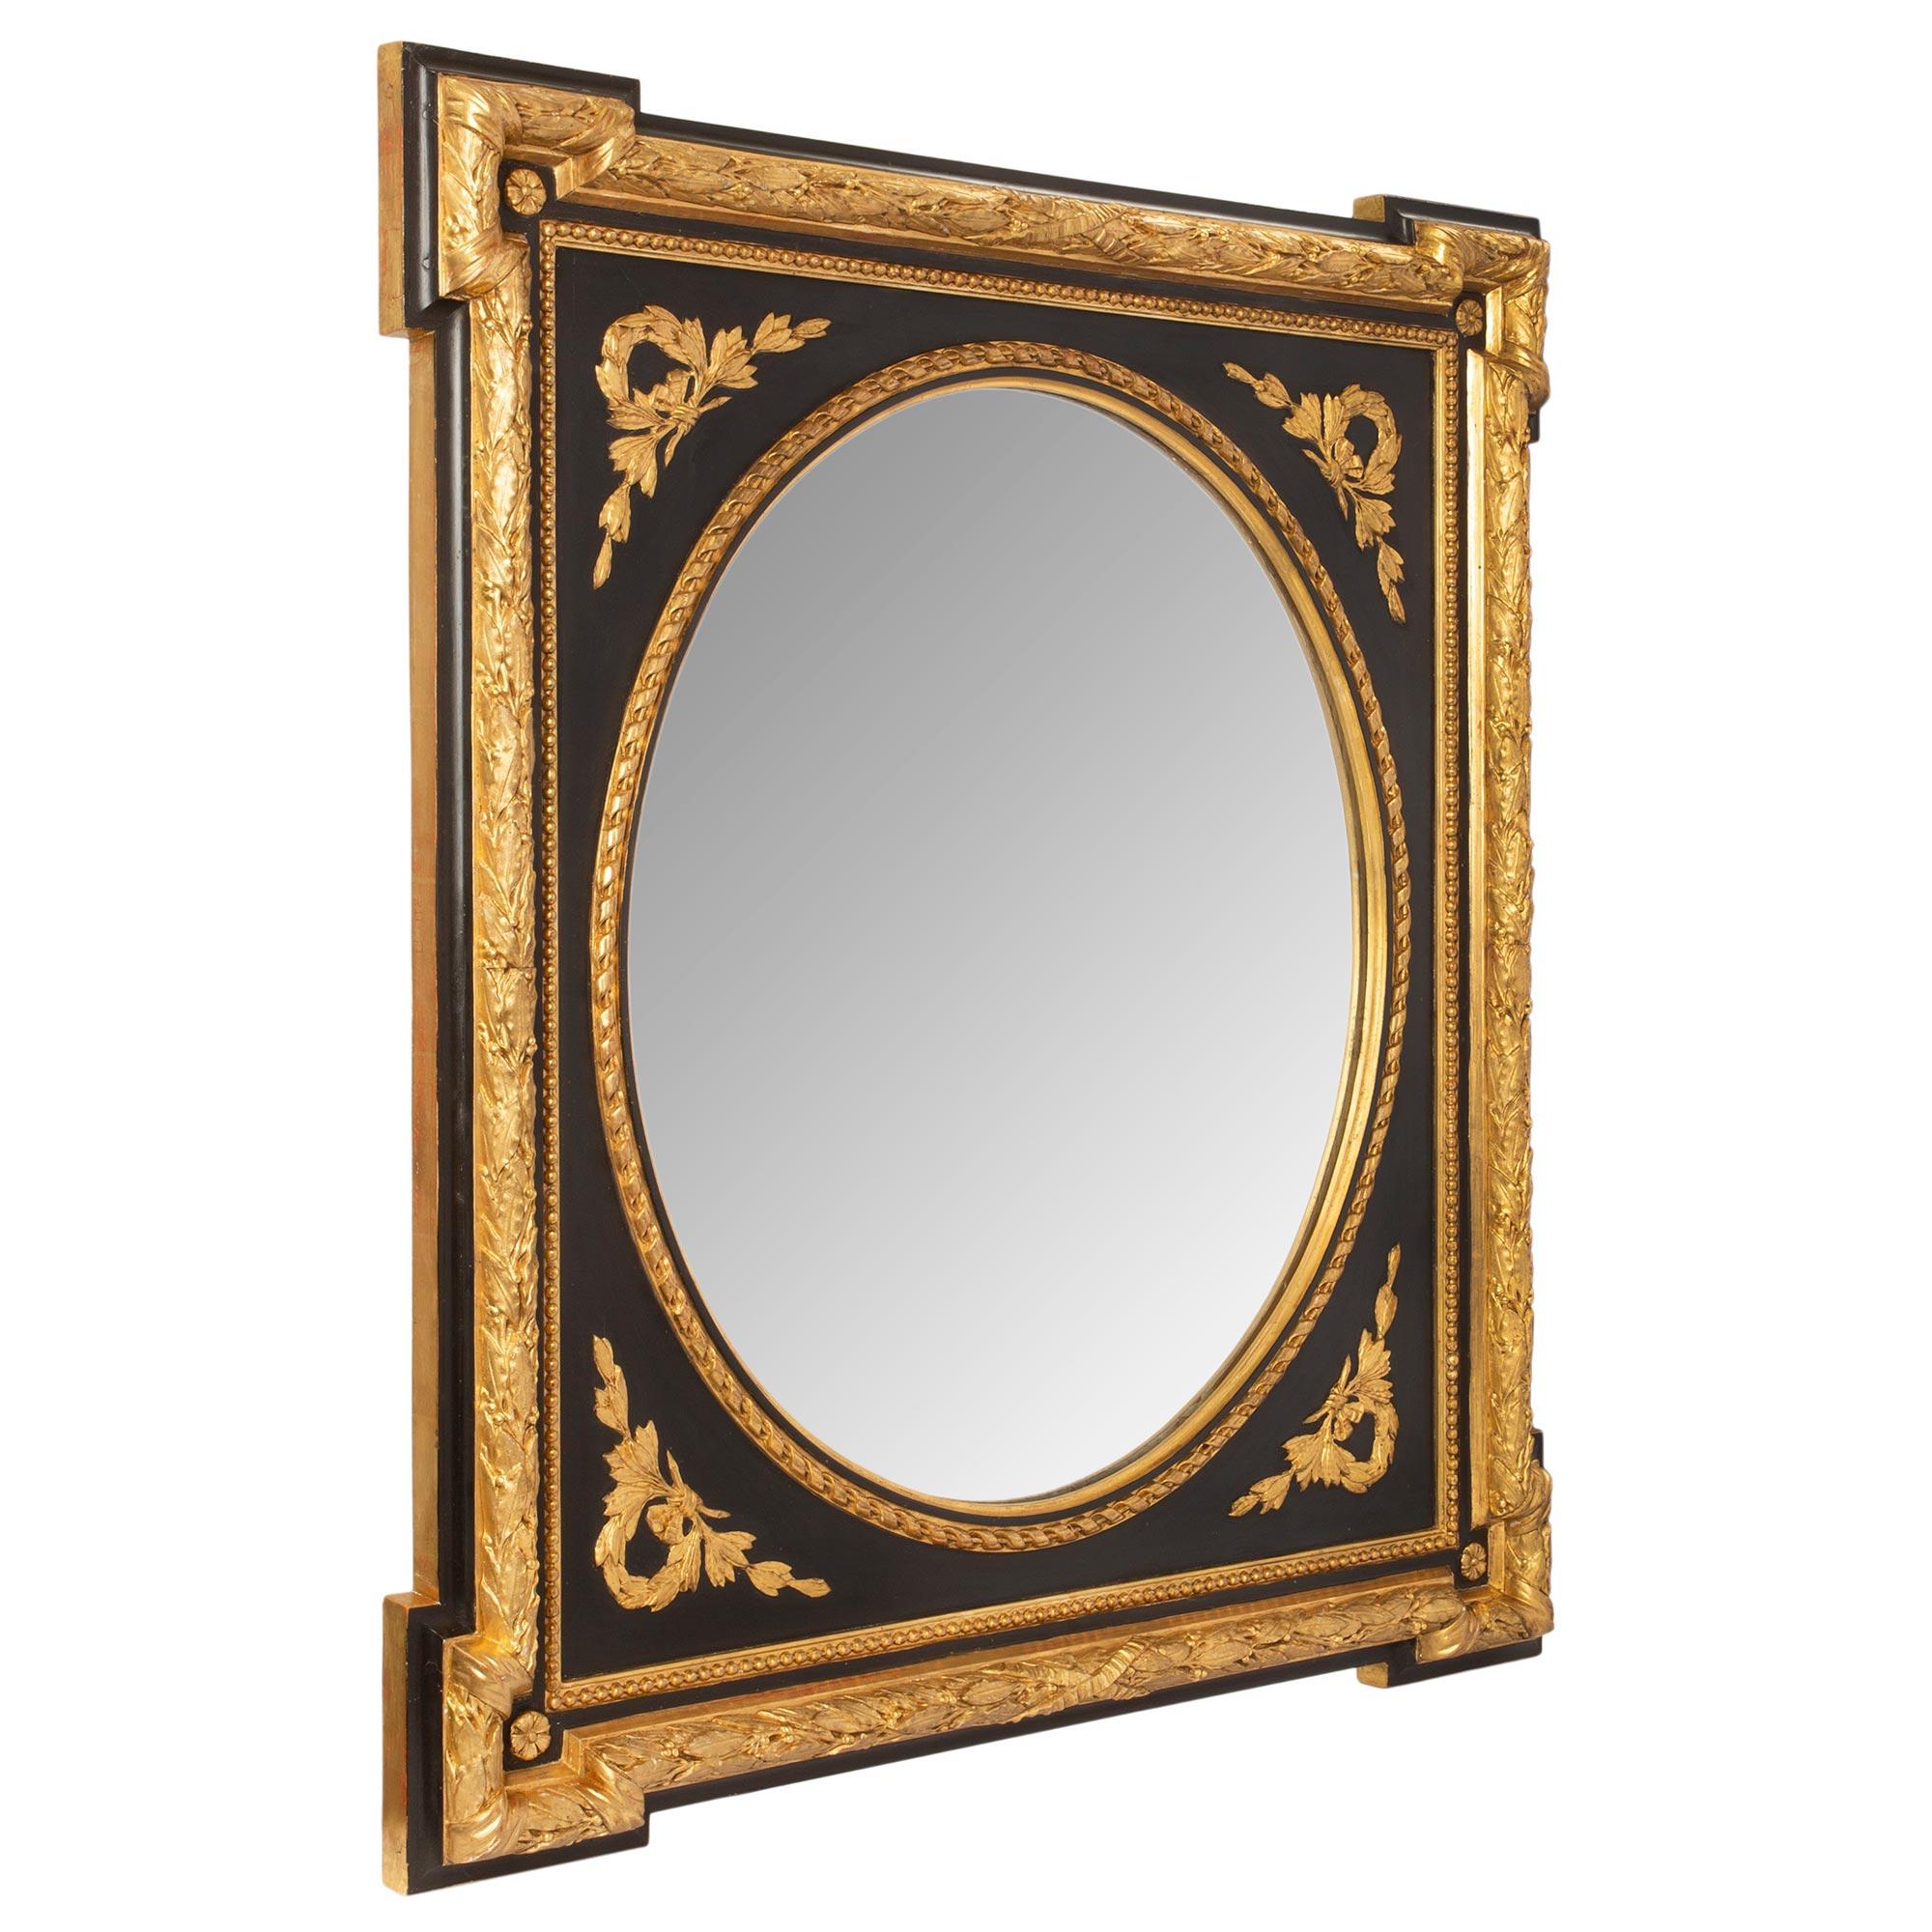 A very attractive pair of French 19th century Napoleon III period Louis XVI st. polychrome and gilt mirrors. The outer edge of the frame has bold and richly detailed berried laurel bands with an X ribbon design at two ends and protruding corners.